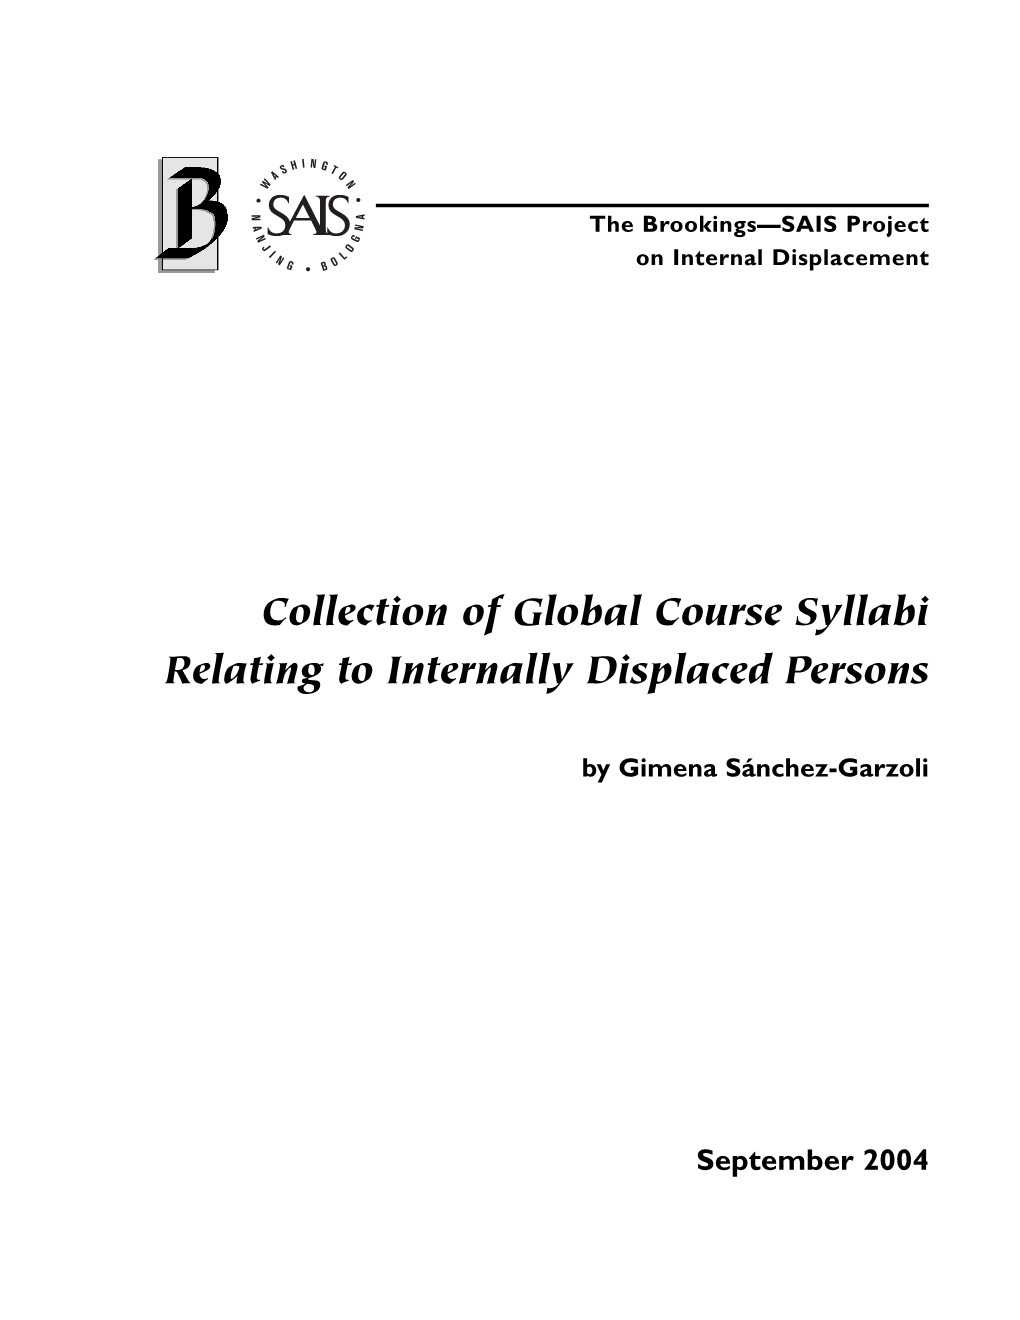 Collection of Global Course Syllabi Relating to Internally Displaced Persons